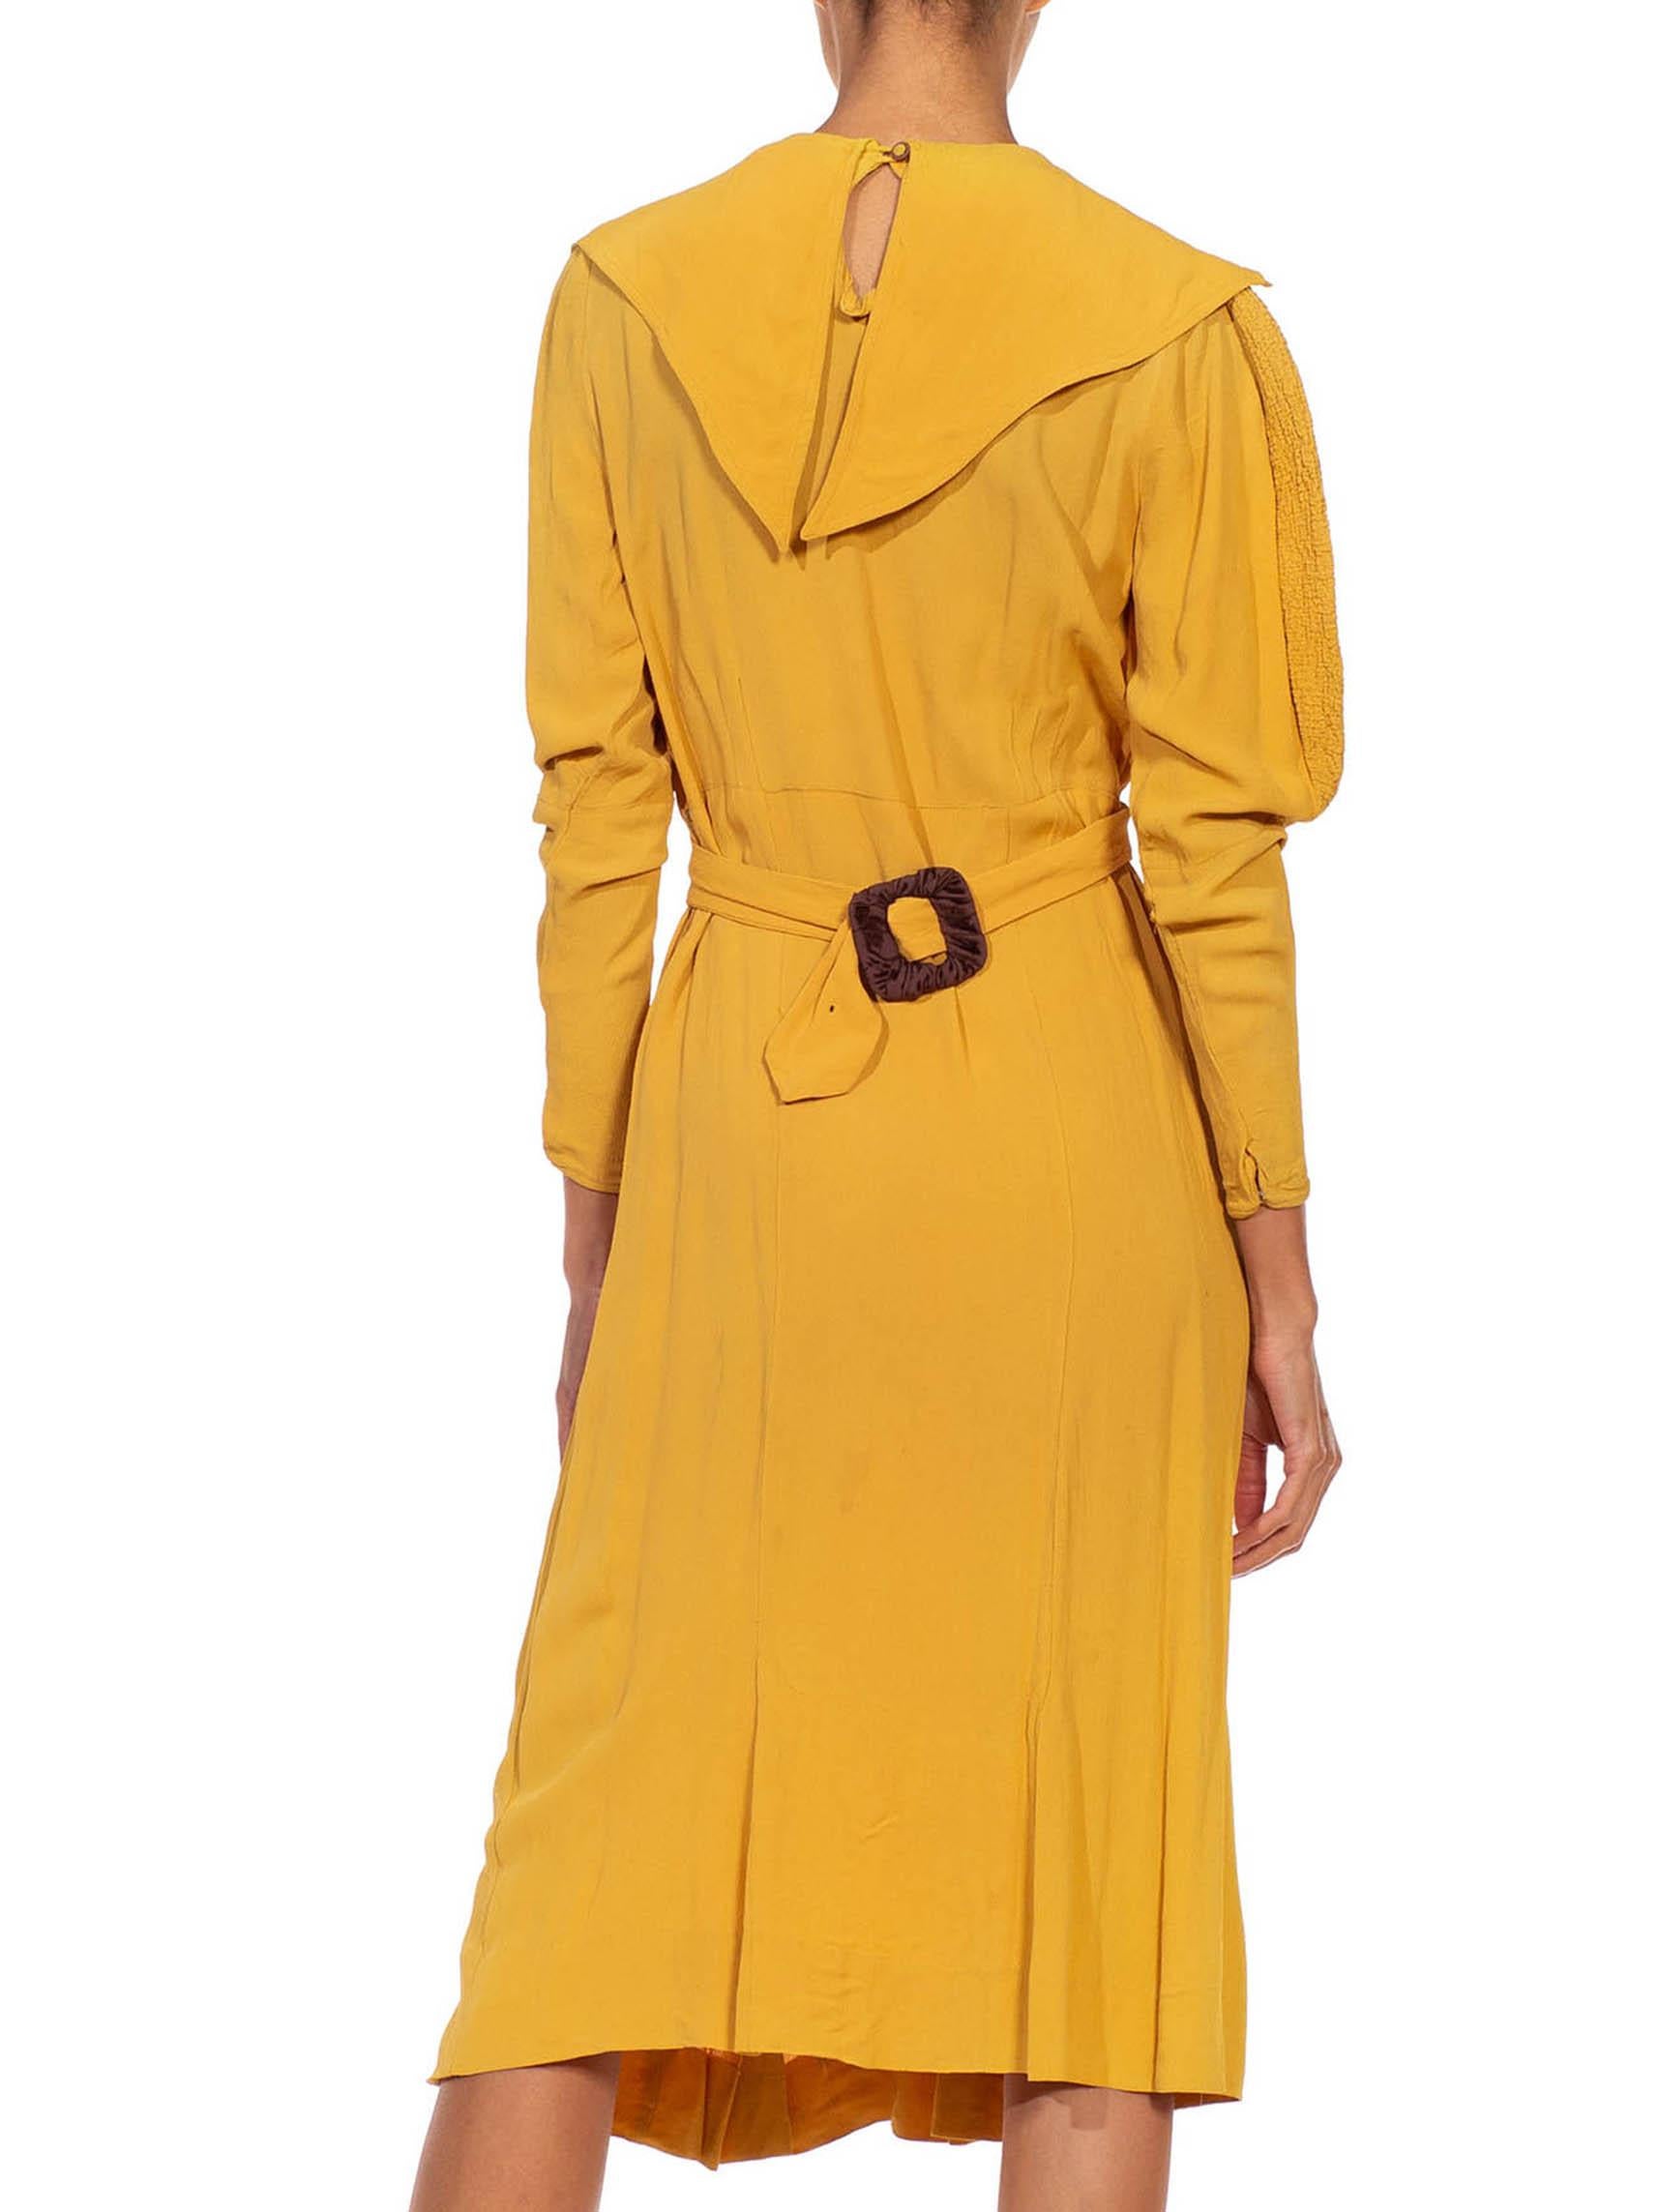 Women's 1930S Mustard Yellow Rayon Crepe Caplet Dress With Leg O Mutton Sleeves For Sale